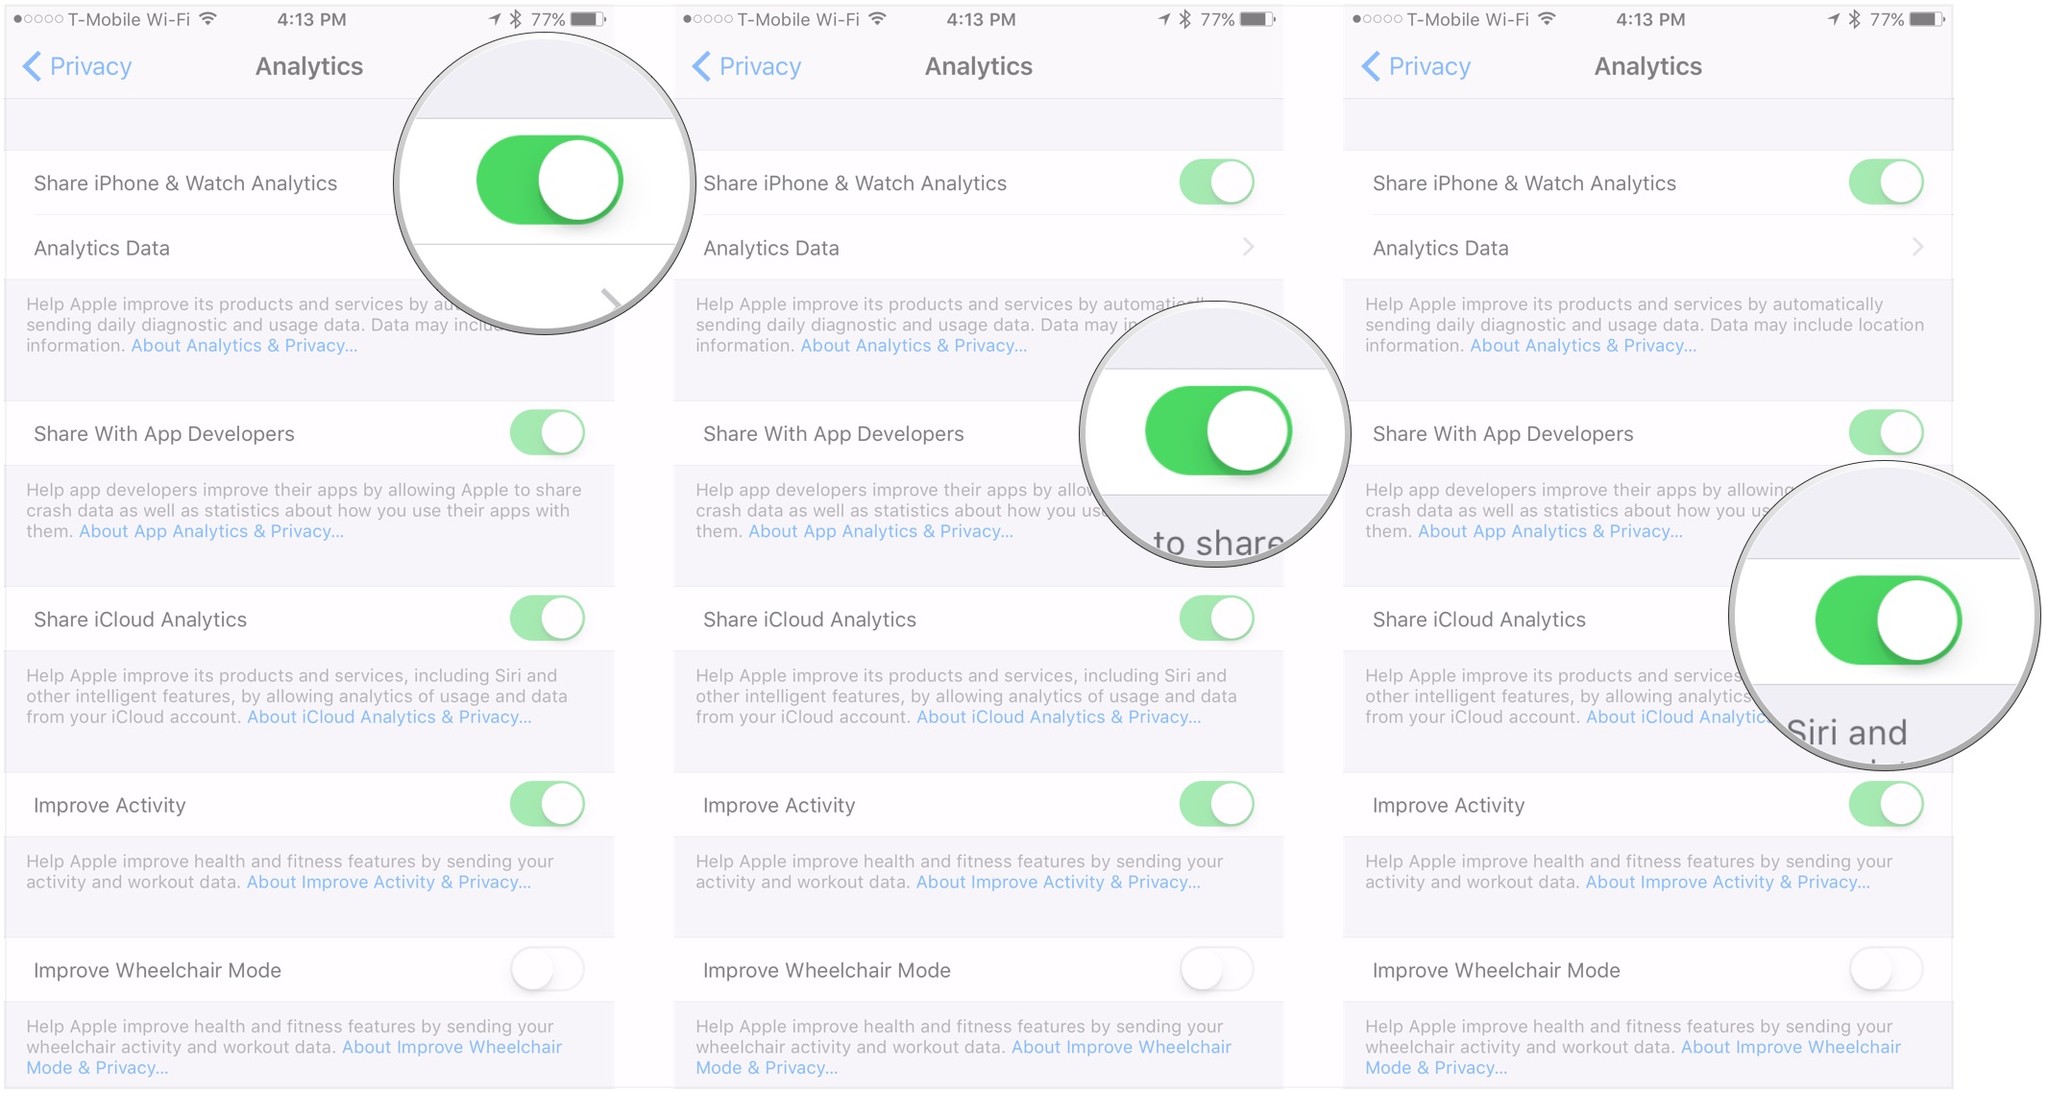 Flip switches for Share iPhone analytics, share with devs, share iCloud